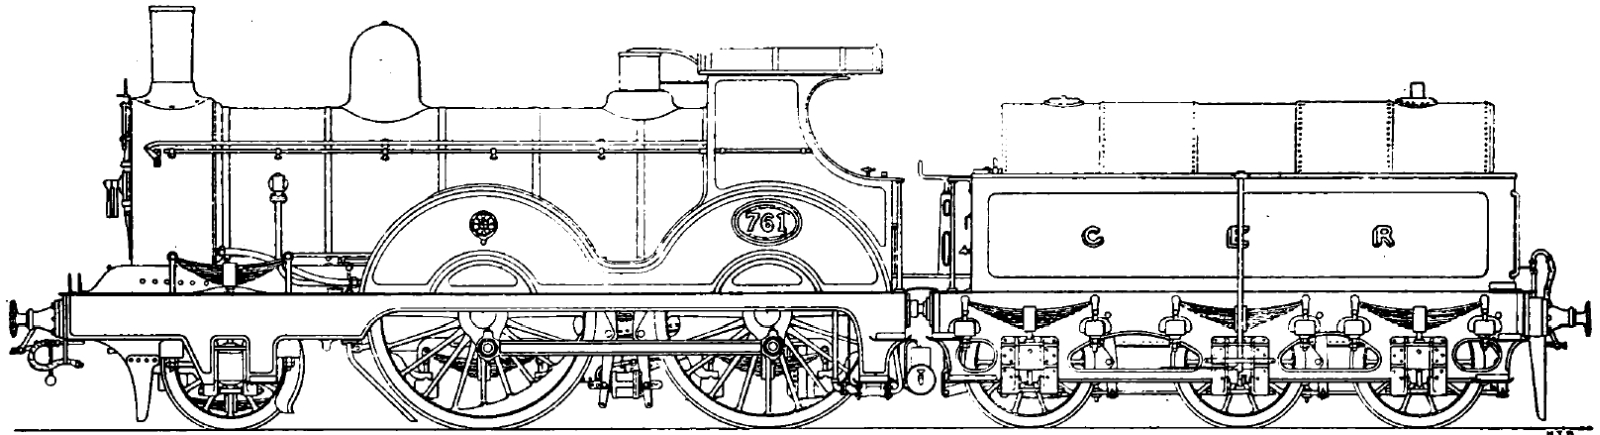 Schematic drawing of the original version with an oil tender